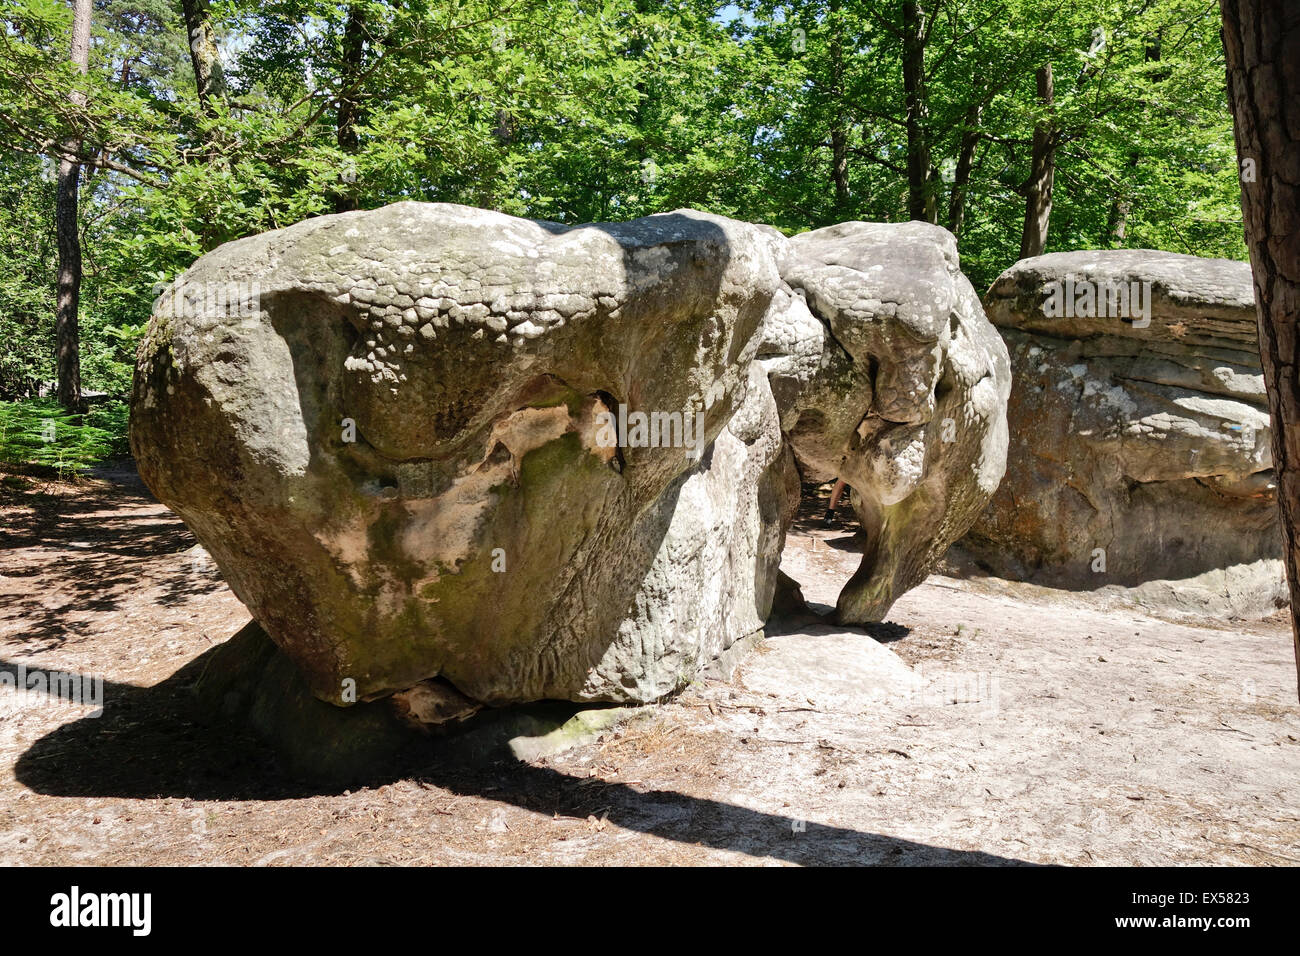 The Elephant, Sandstone boulder, bouldering, climbing, rock climbing, circuits in Fontainebleau, France. Stock Photo